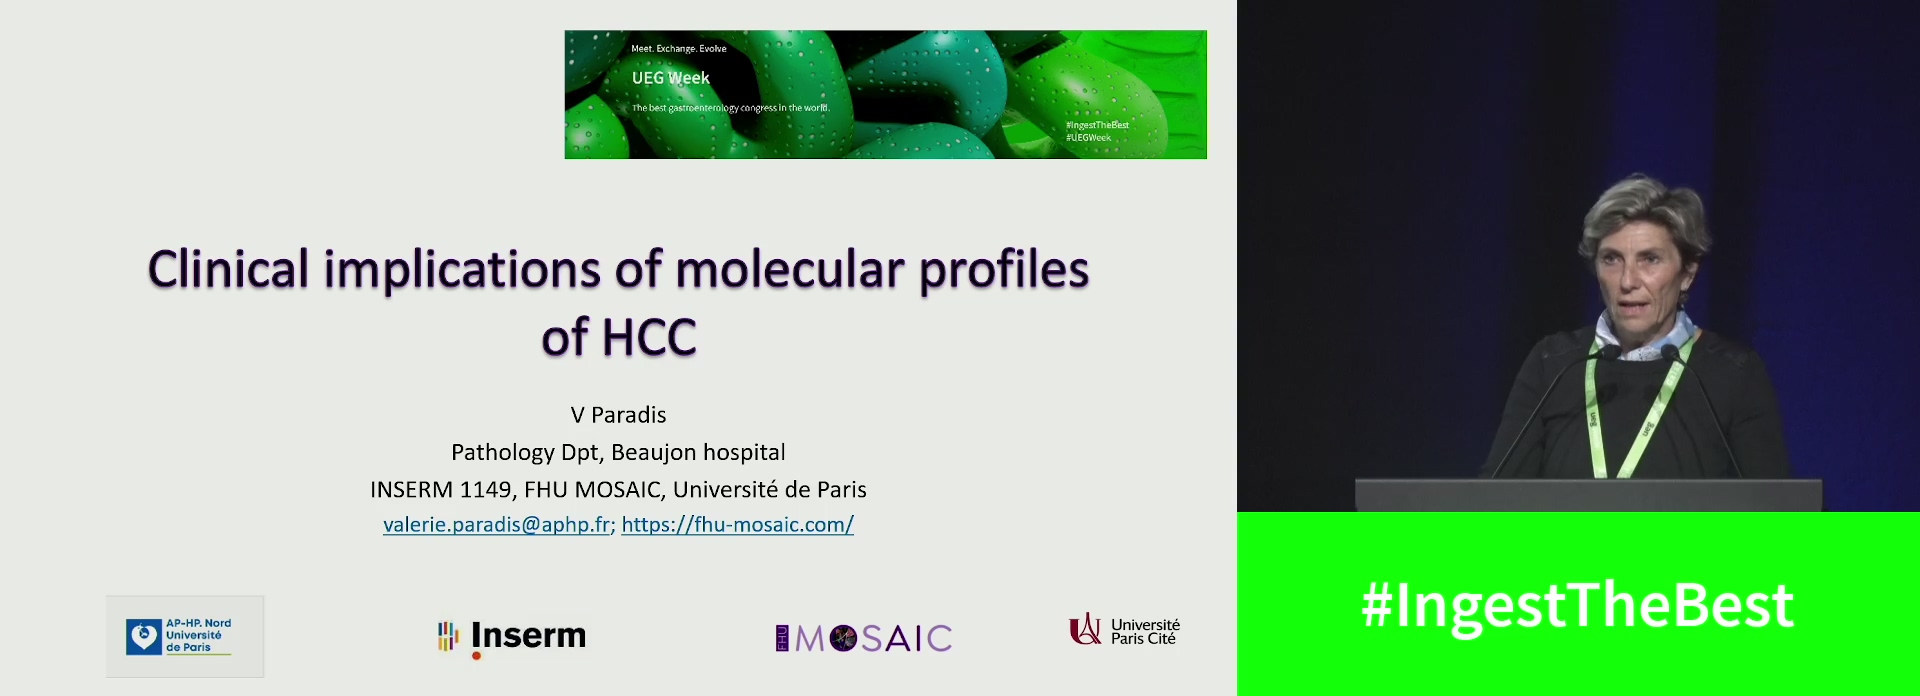 Clinical implications of molecular and immunological profiles of HCC